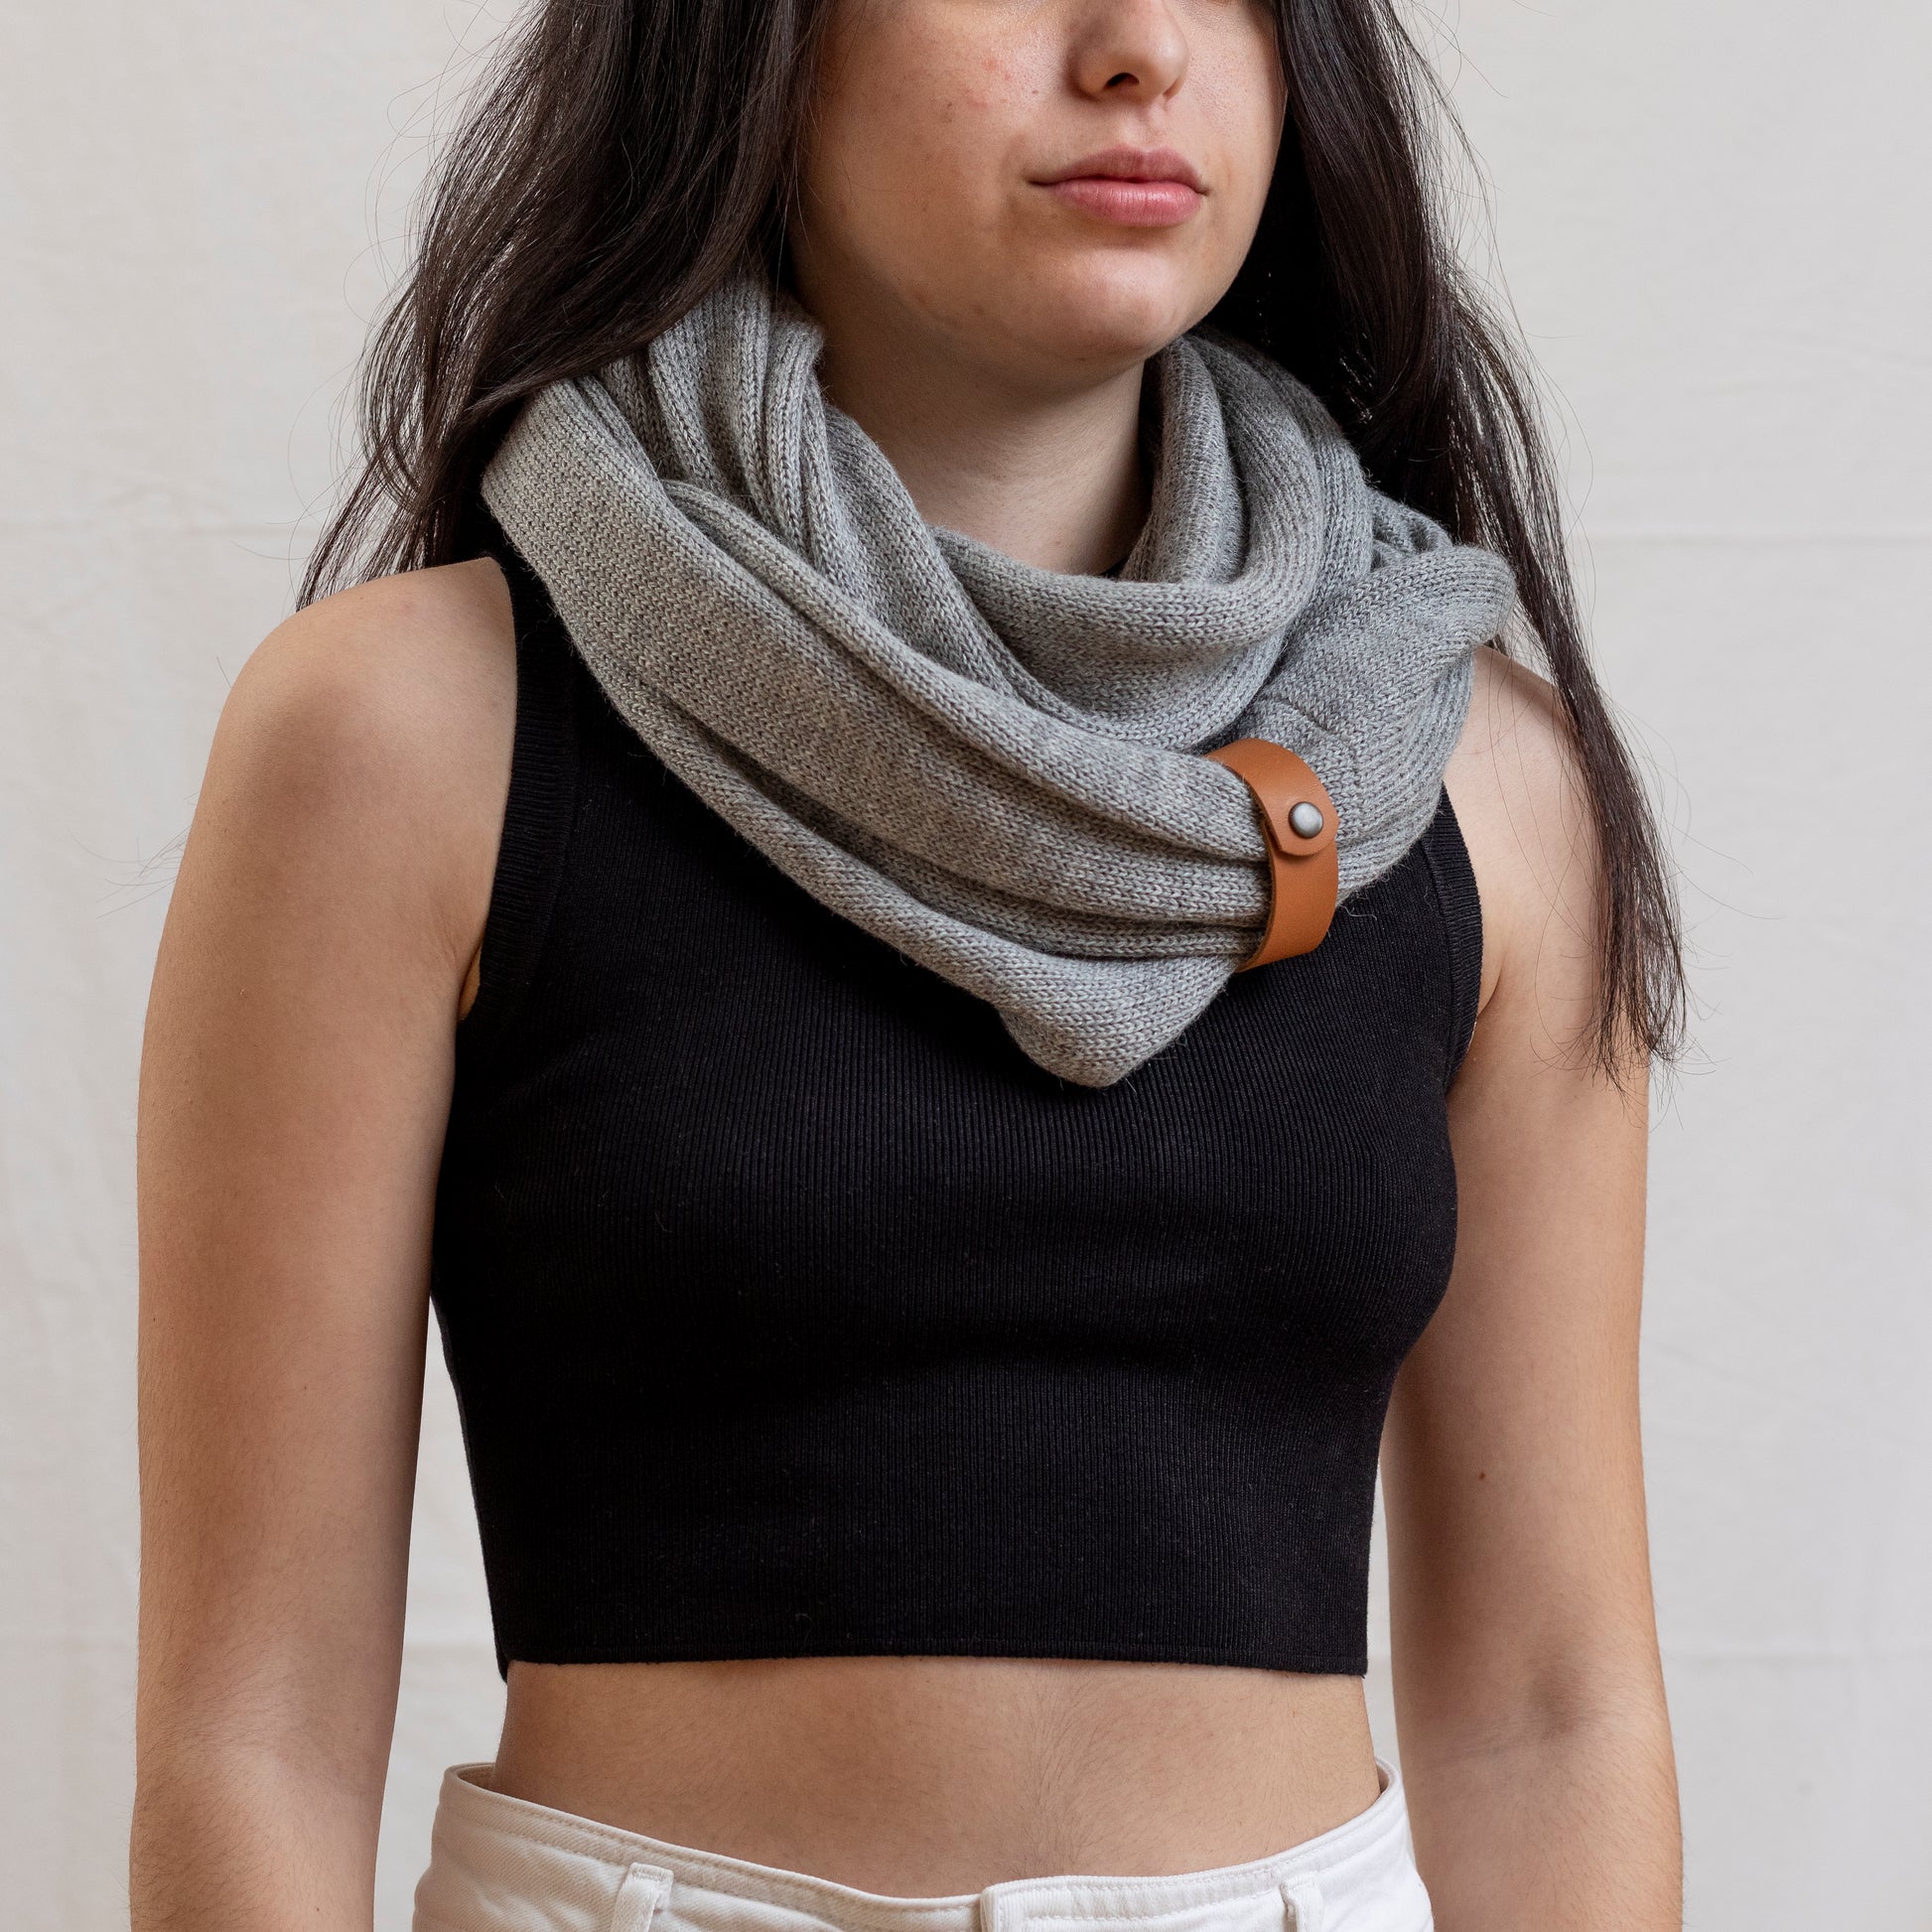 Woman wearing stone coloured luxury infinity scarf with leather strap detail.